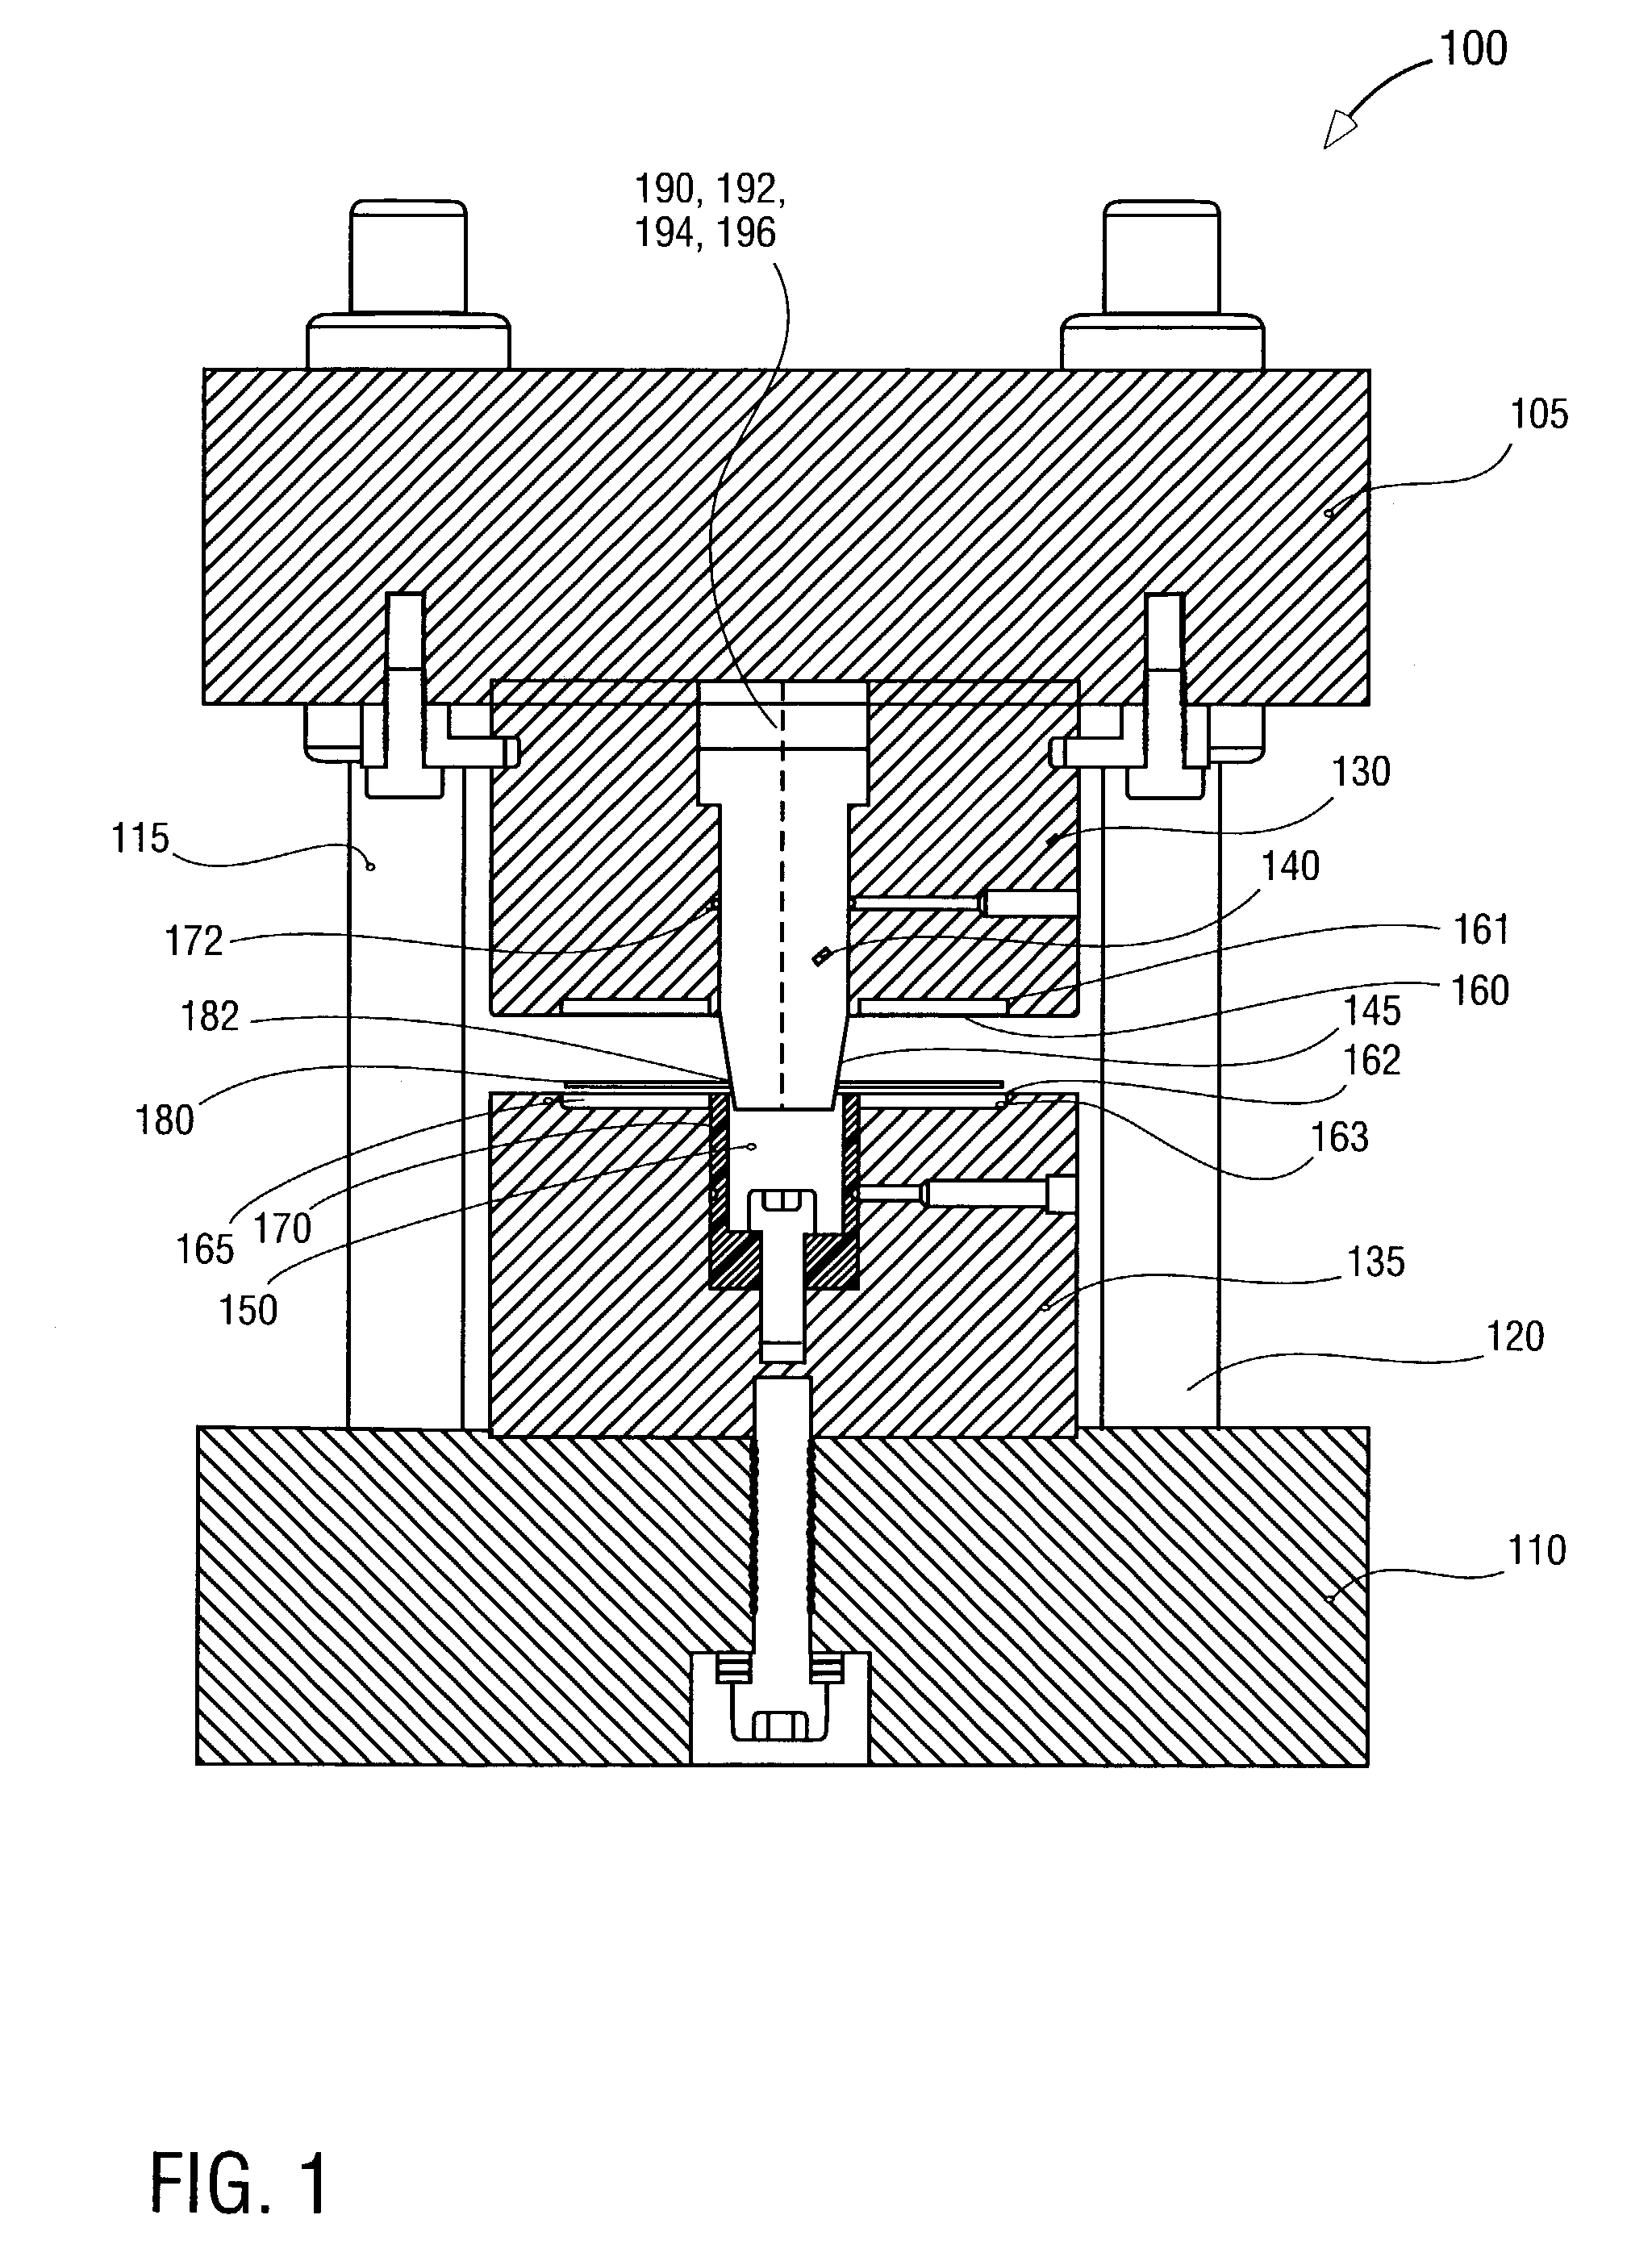 Disk alignment apparatus and method for patterned media production